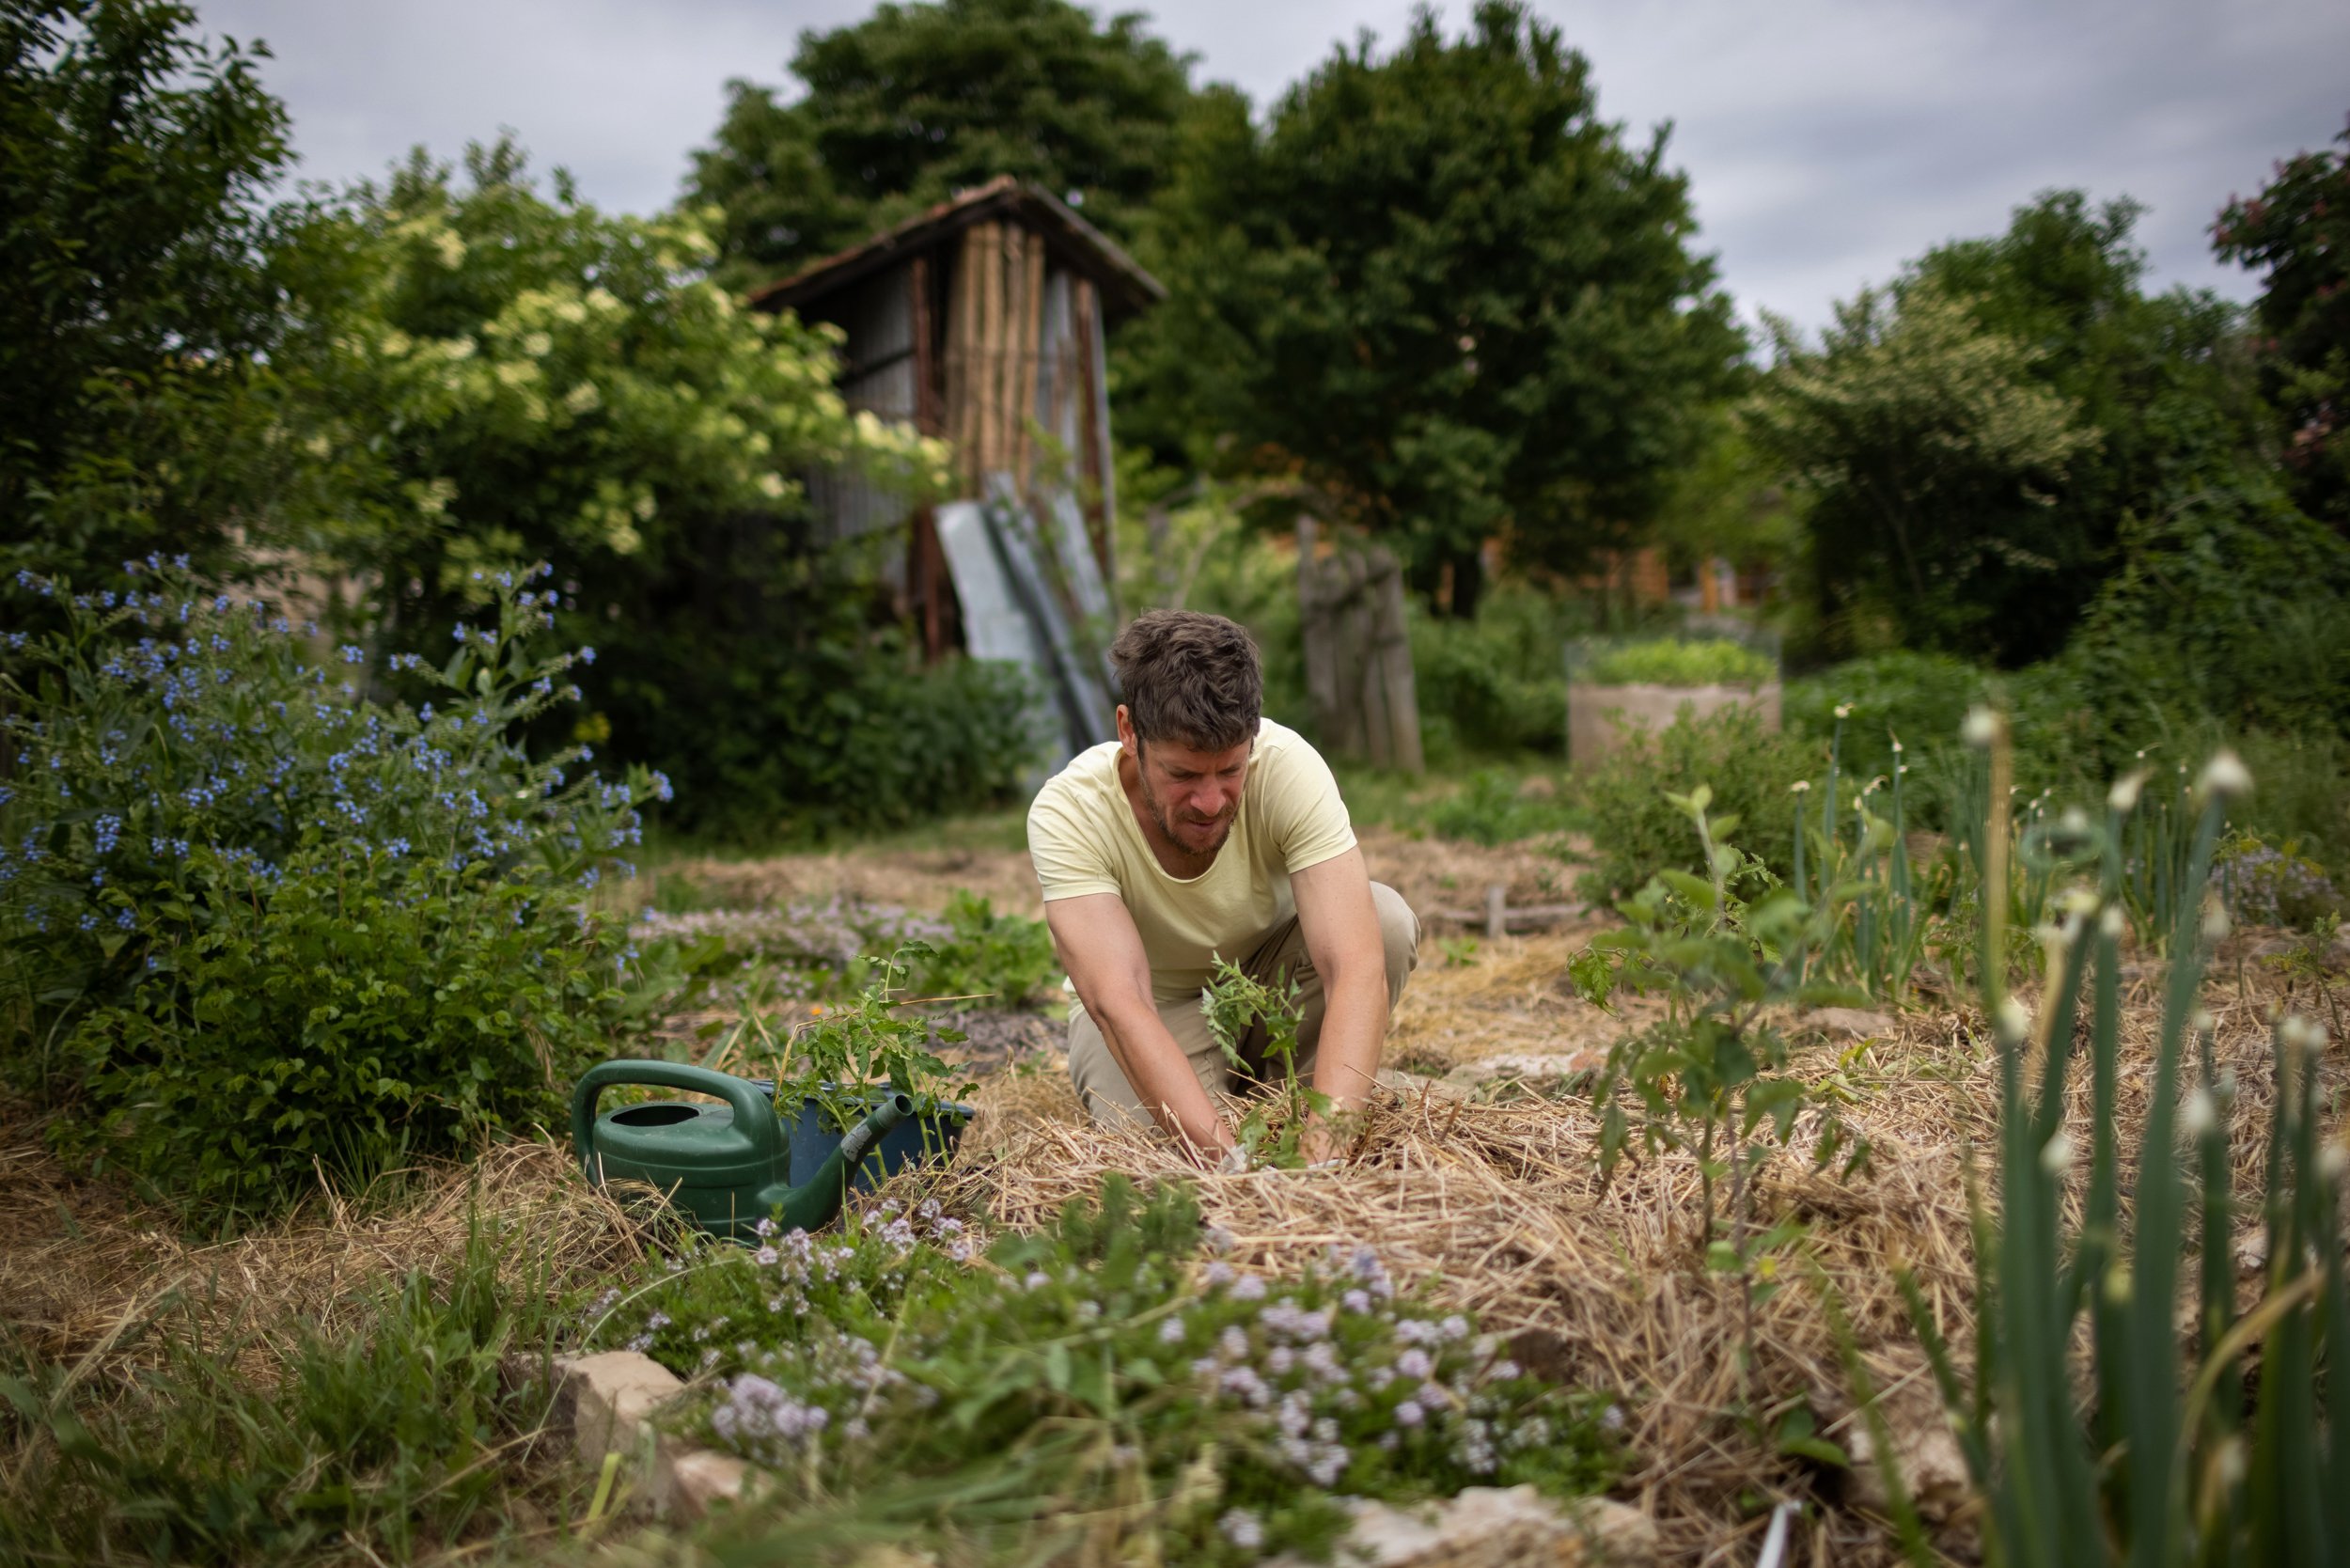  Dani planting tomato seedlings in the garden of their village house in Nyim on May 23, 2022. He covers the soil with hay and other organic matter from the garden: the mulch with the right carbon-to-nitrogen ratio helps to bind and retain moisture, n